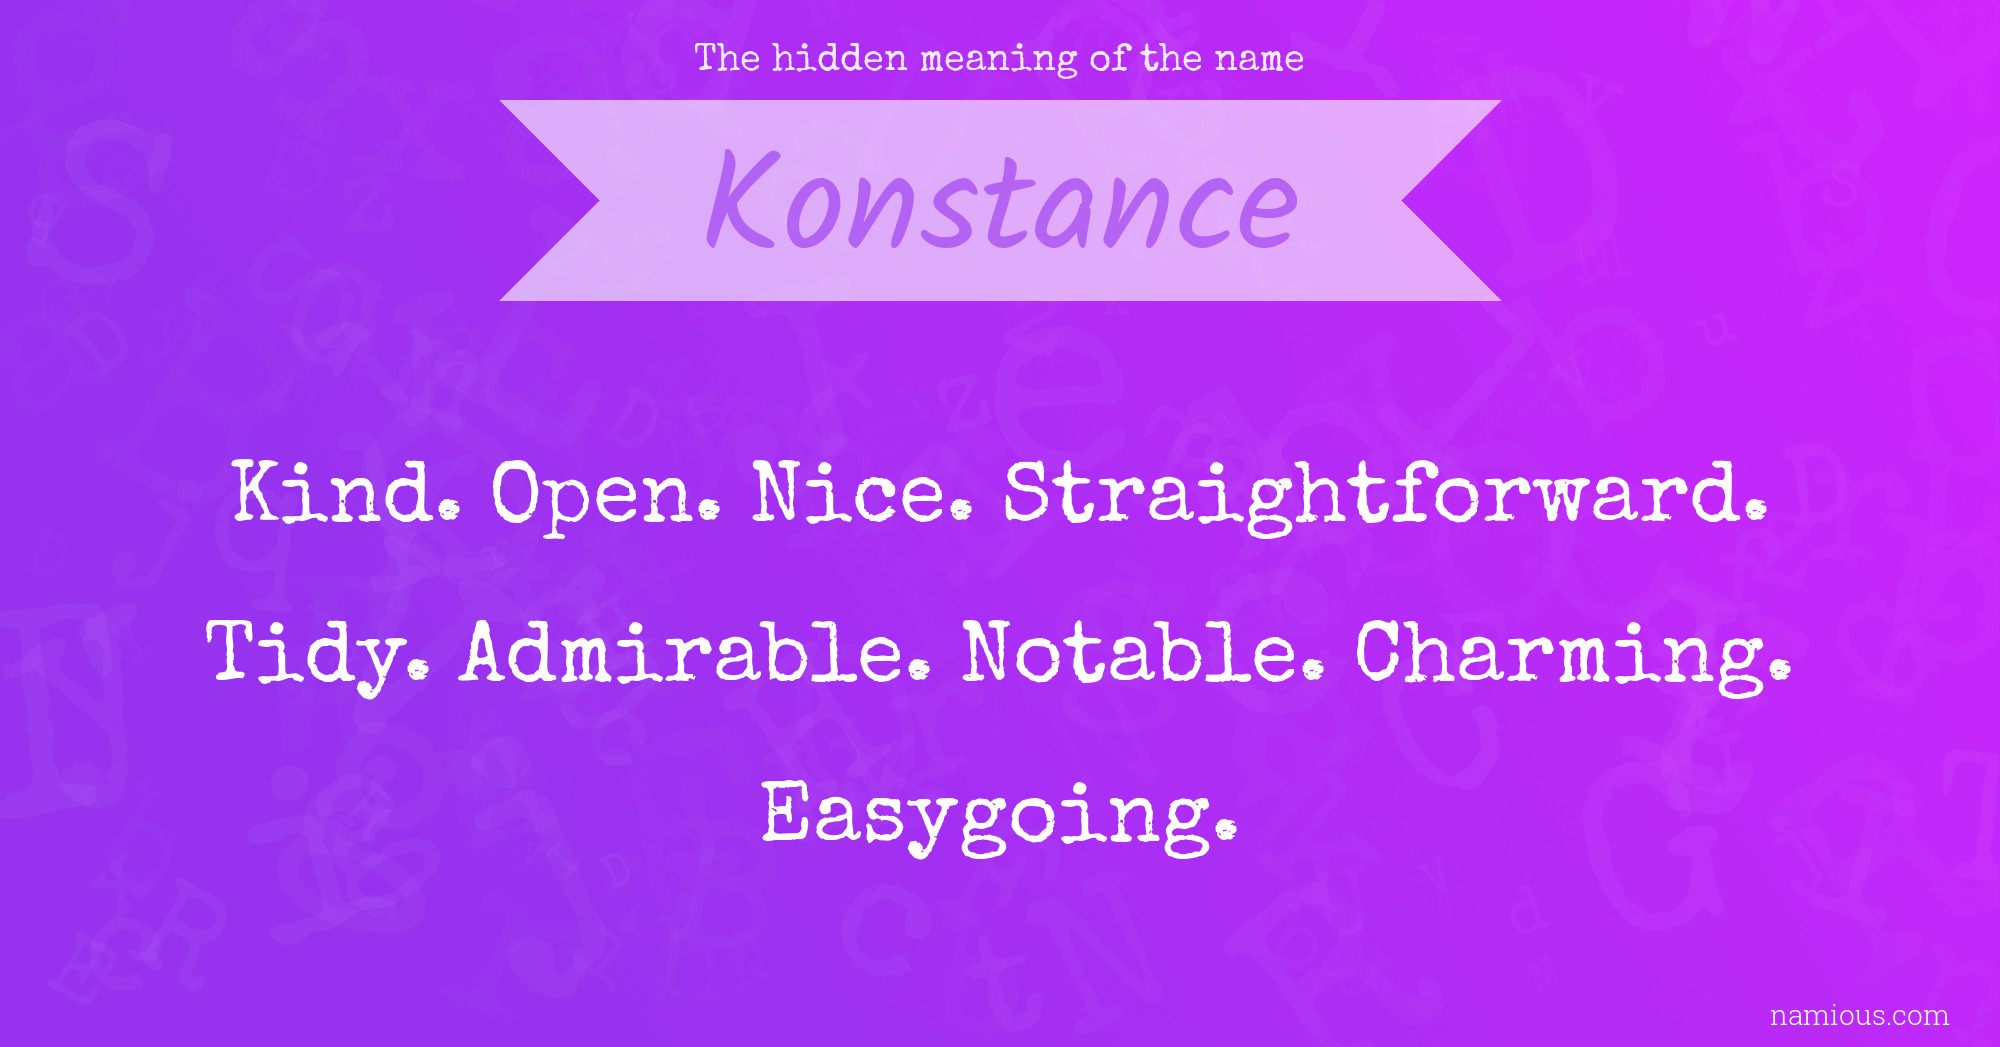 The hidden meaning of the name Konstance